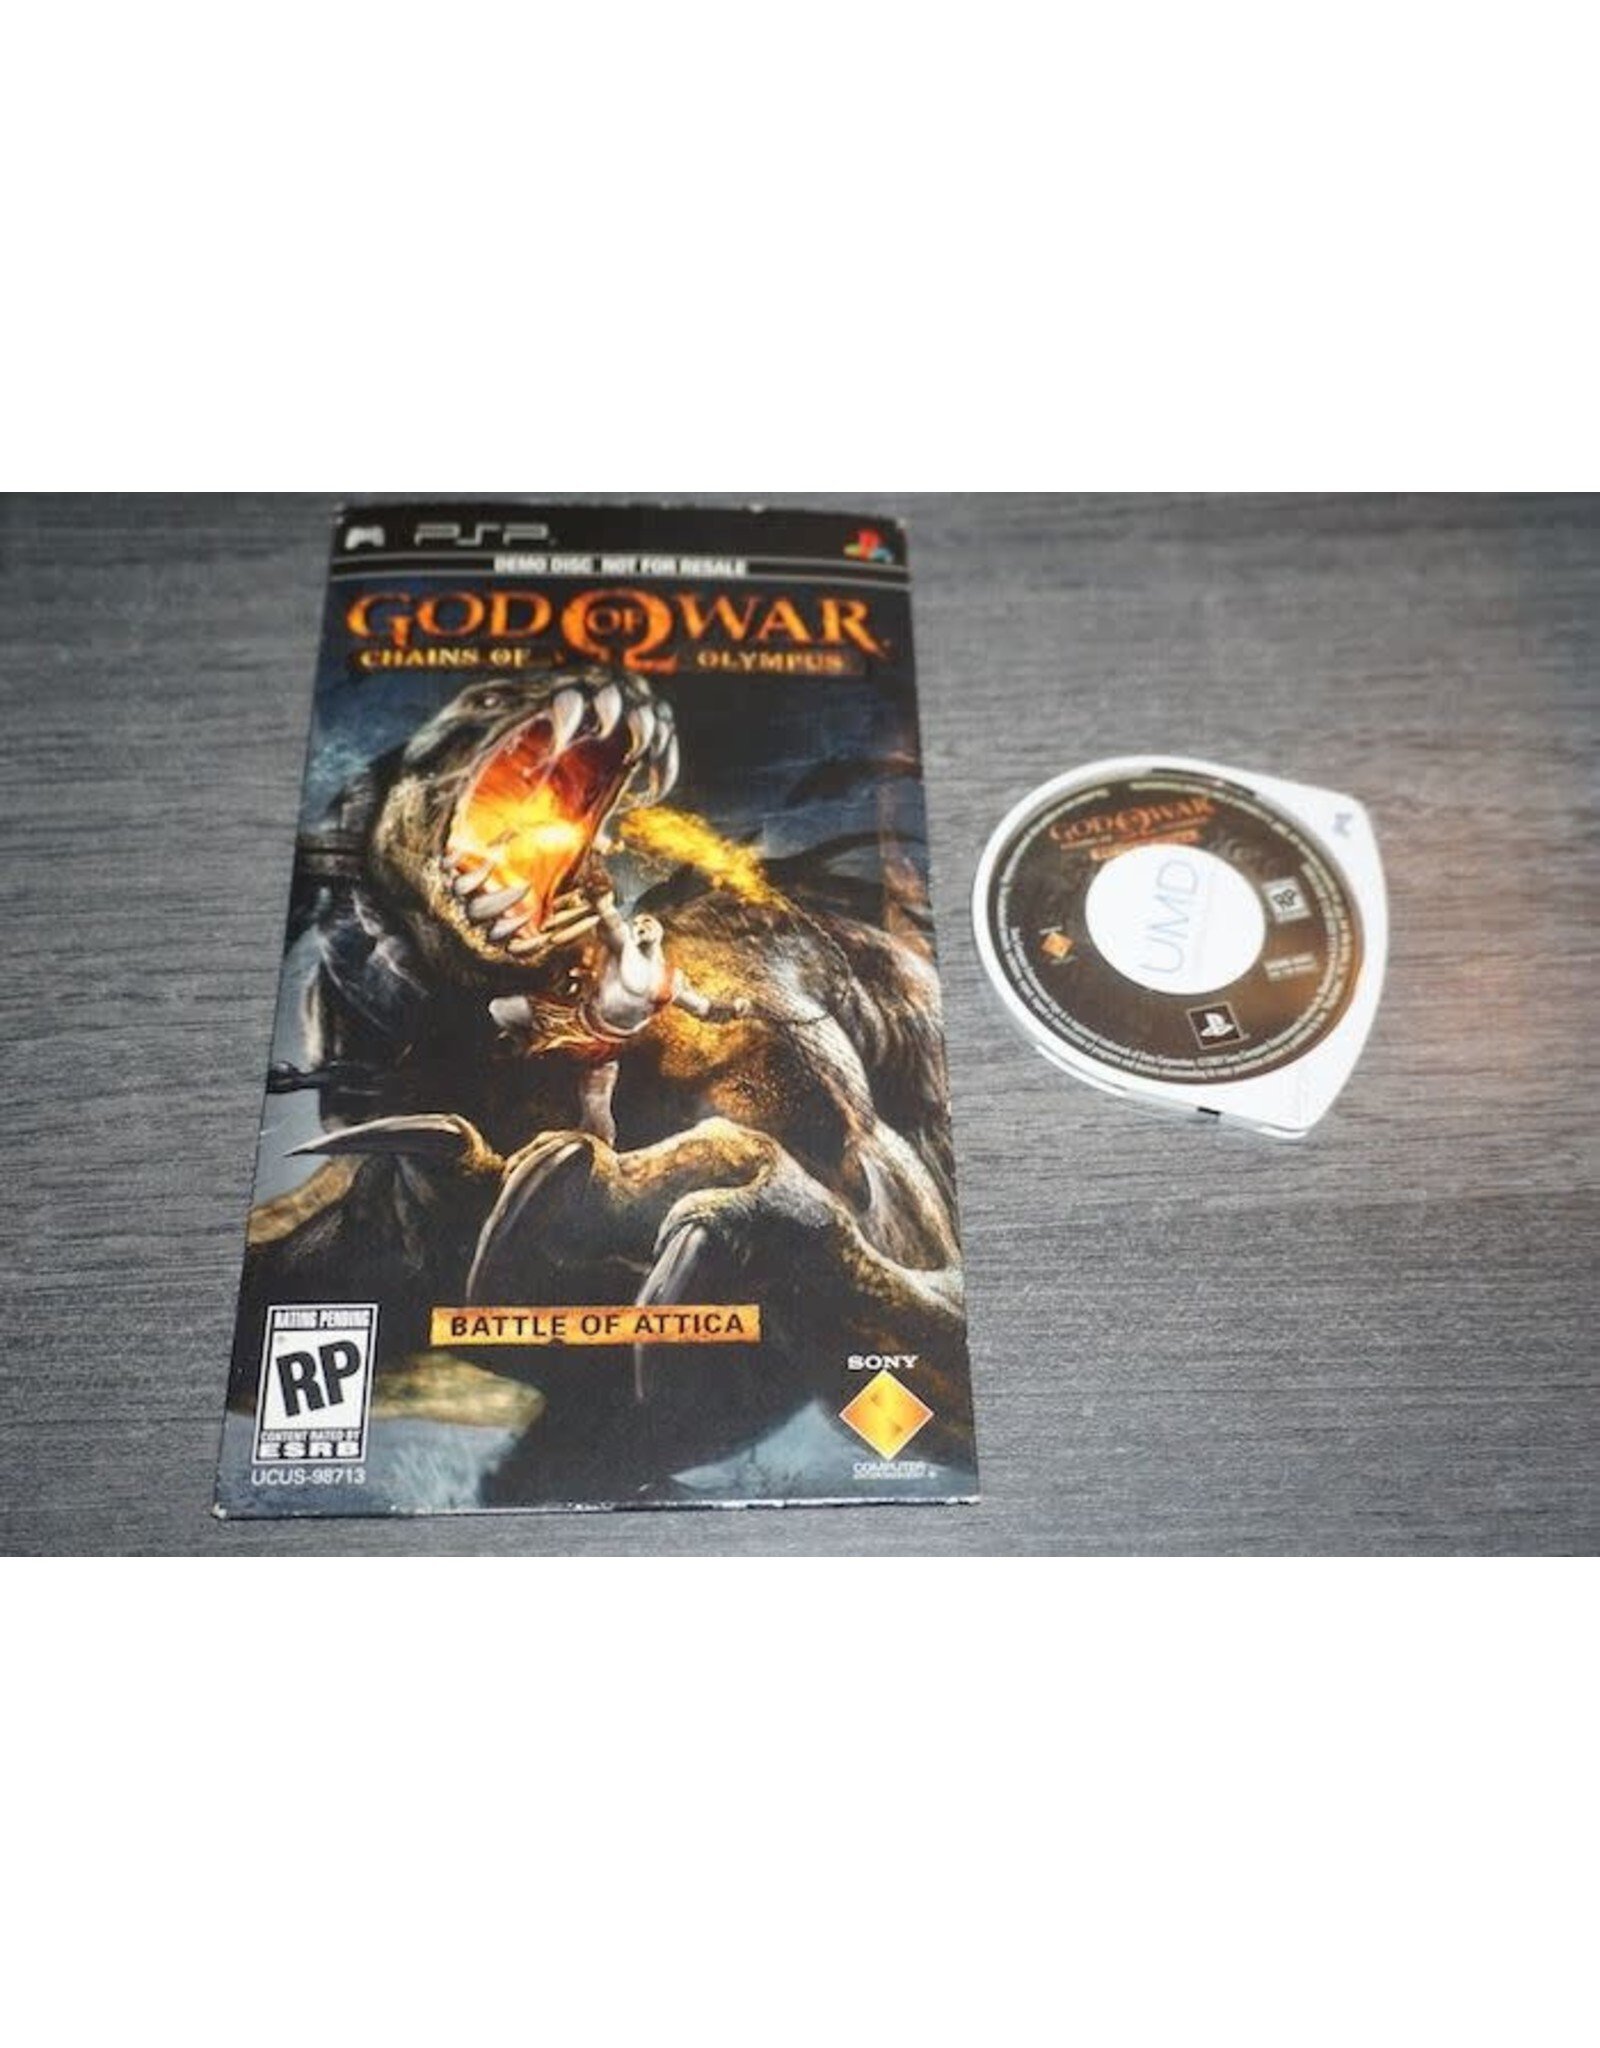 God of War: Chains of Olympus ROM, PSP Game